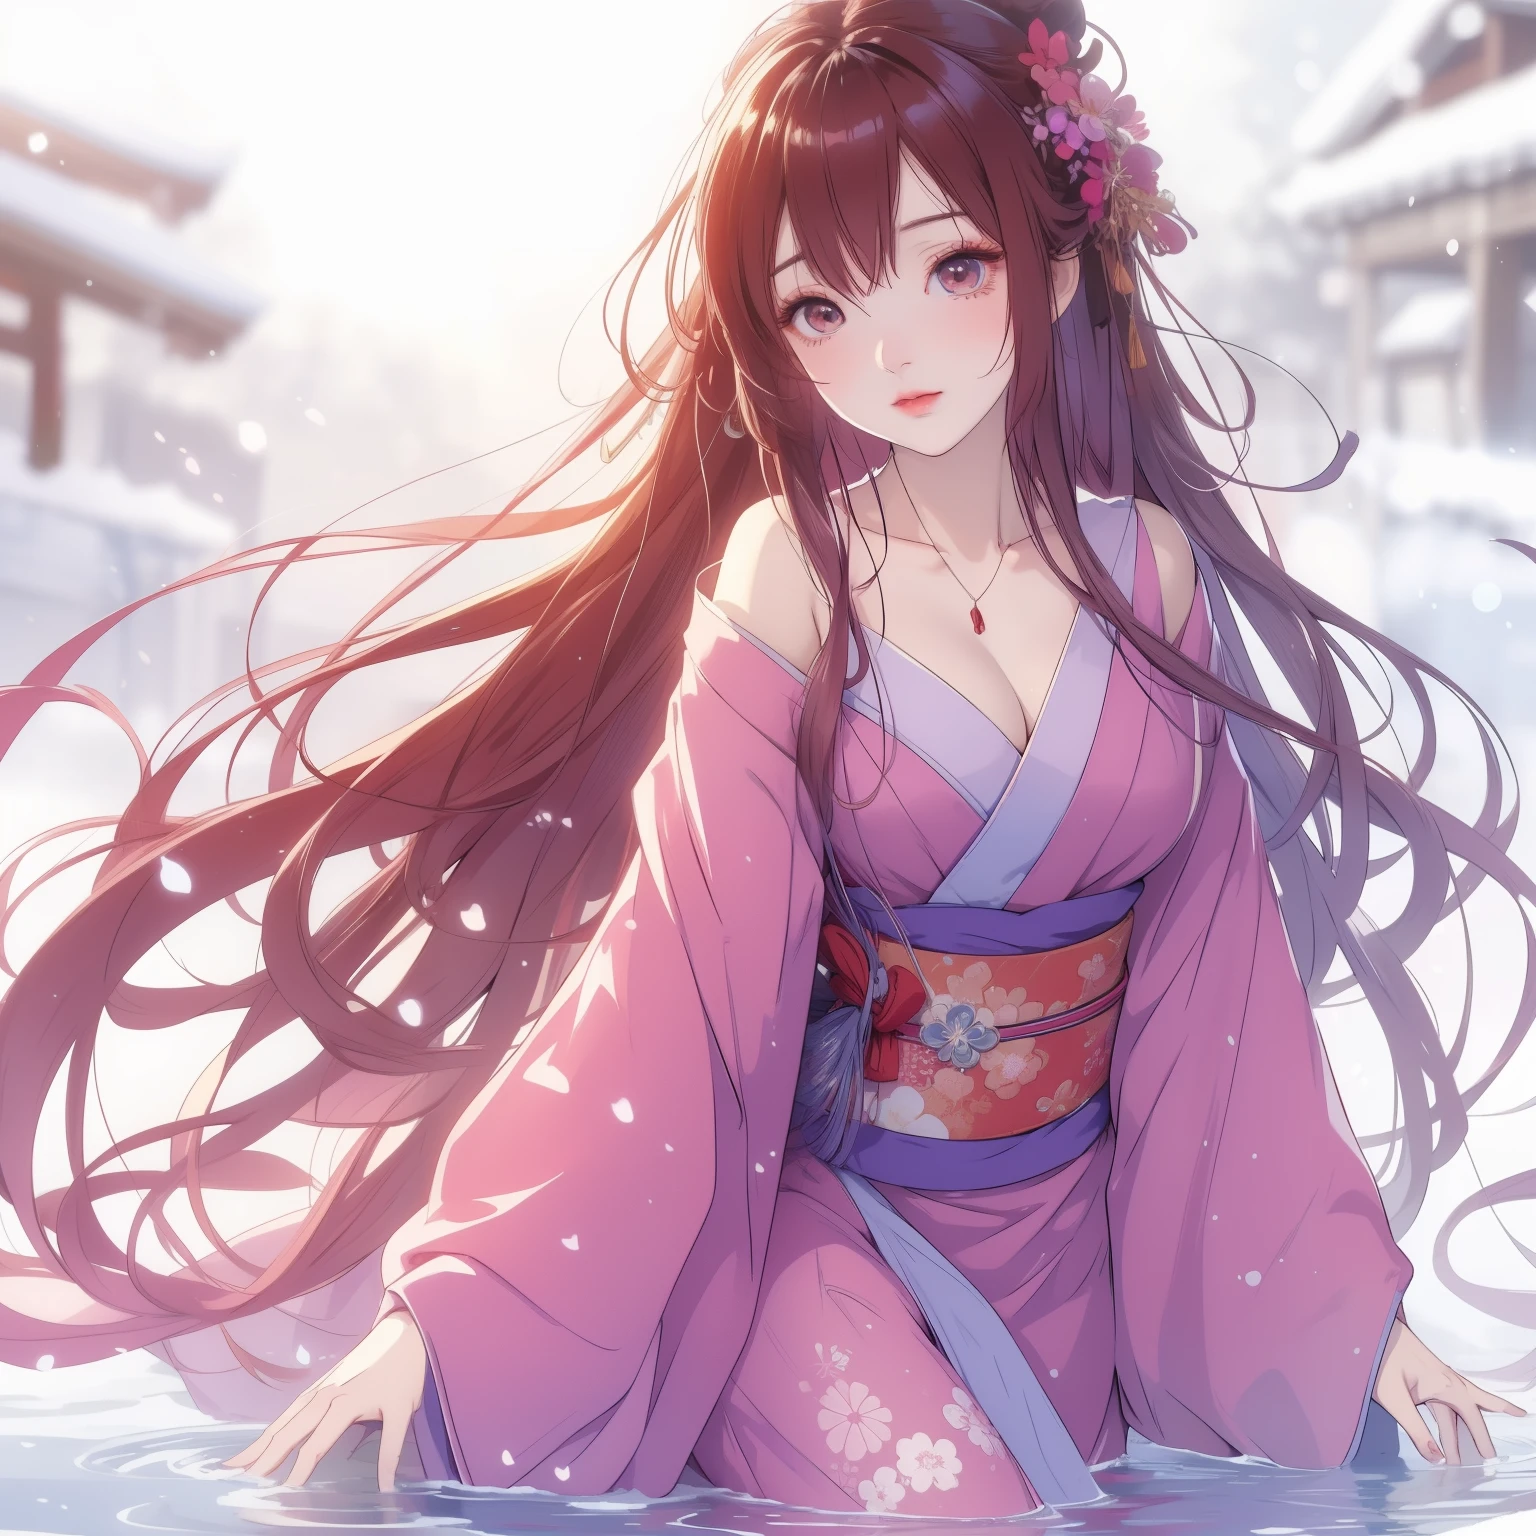 Anime girl wearing kimono in the snow, Beautiful anime girl, anime long hair girl, anime style 4k, Beautiful anime woman, Beautiful anime, beautiful anime girl, flowing hair and gown, Cute anime waifu wearing beautiful clothes, cute anime girl, Beautiful anime style, Attractive anime girl, Beautiful anime artwork, anime wallpaper 4k, HD anime wallpaper